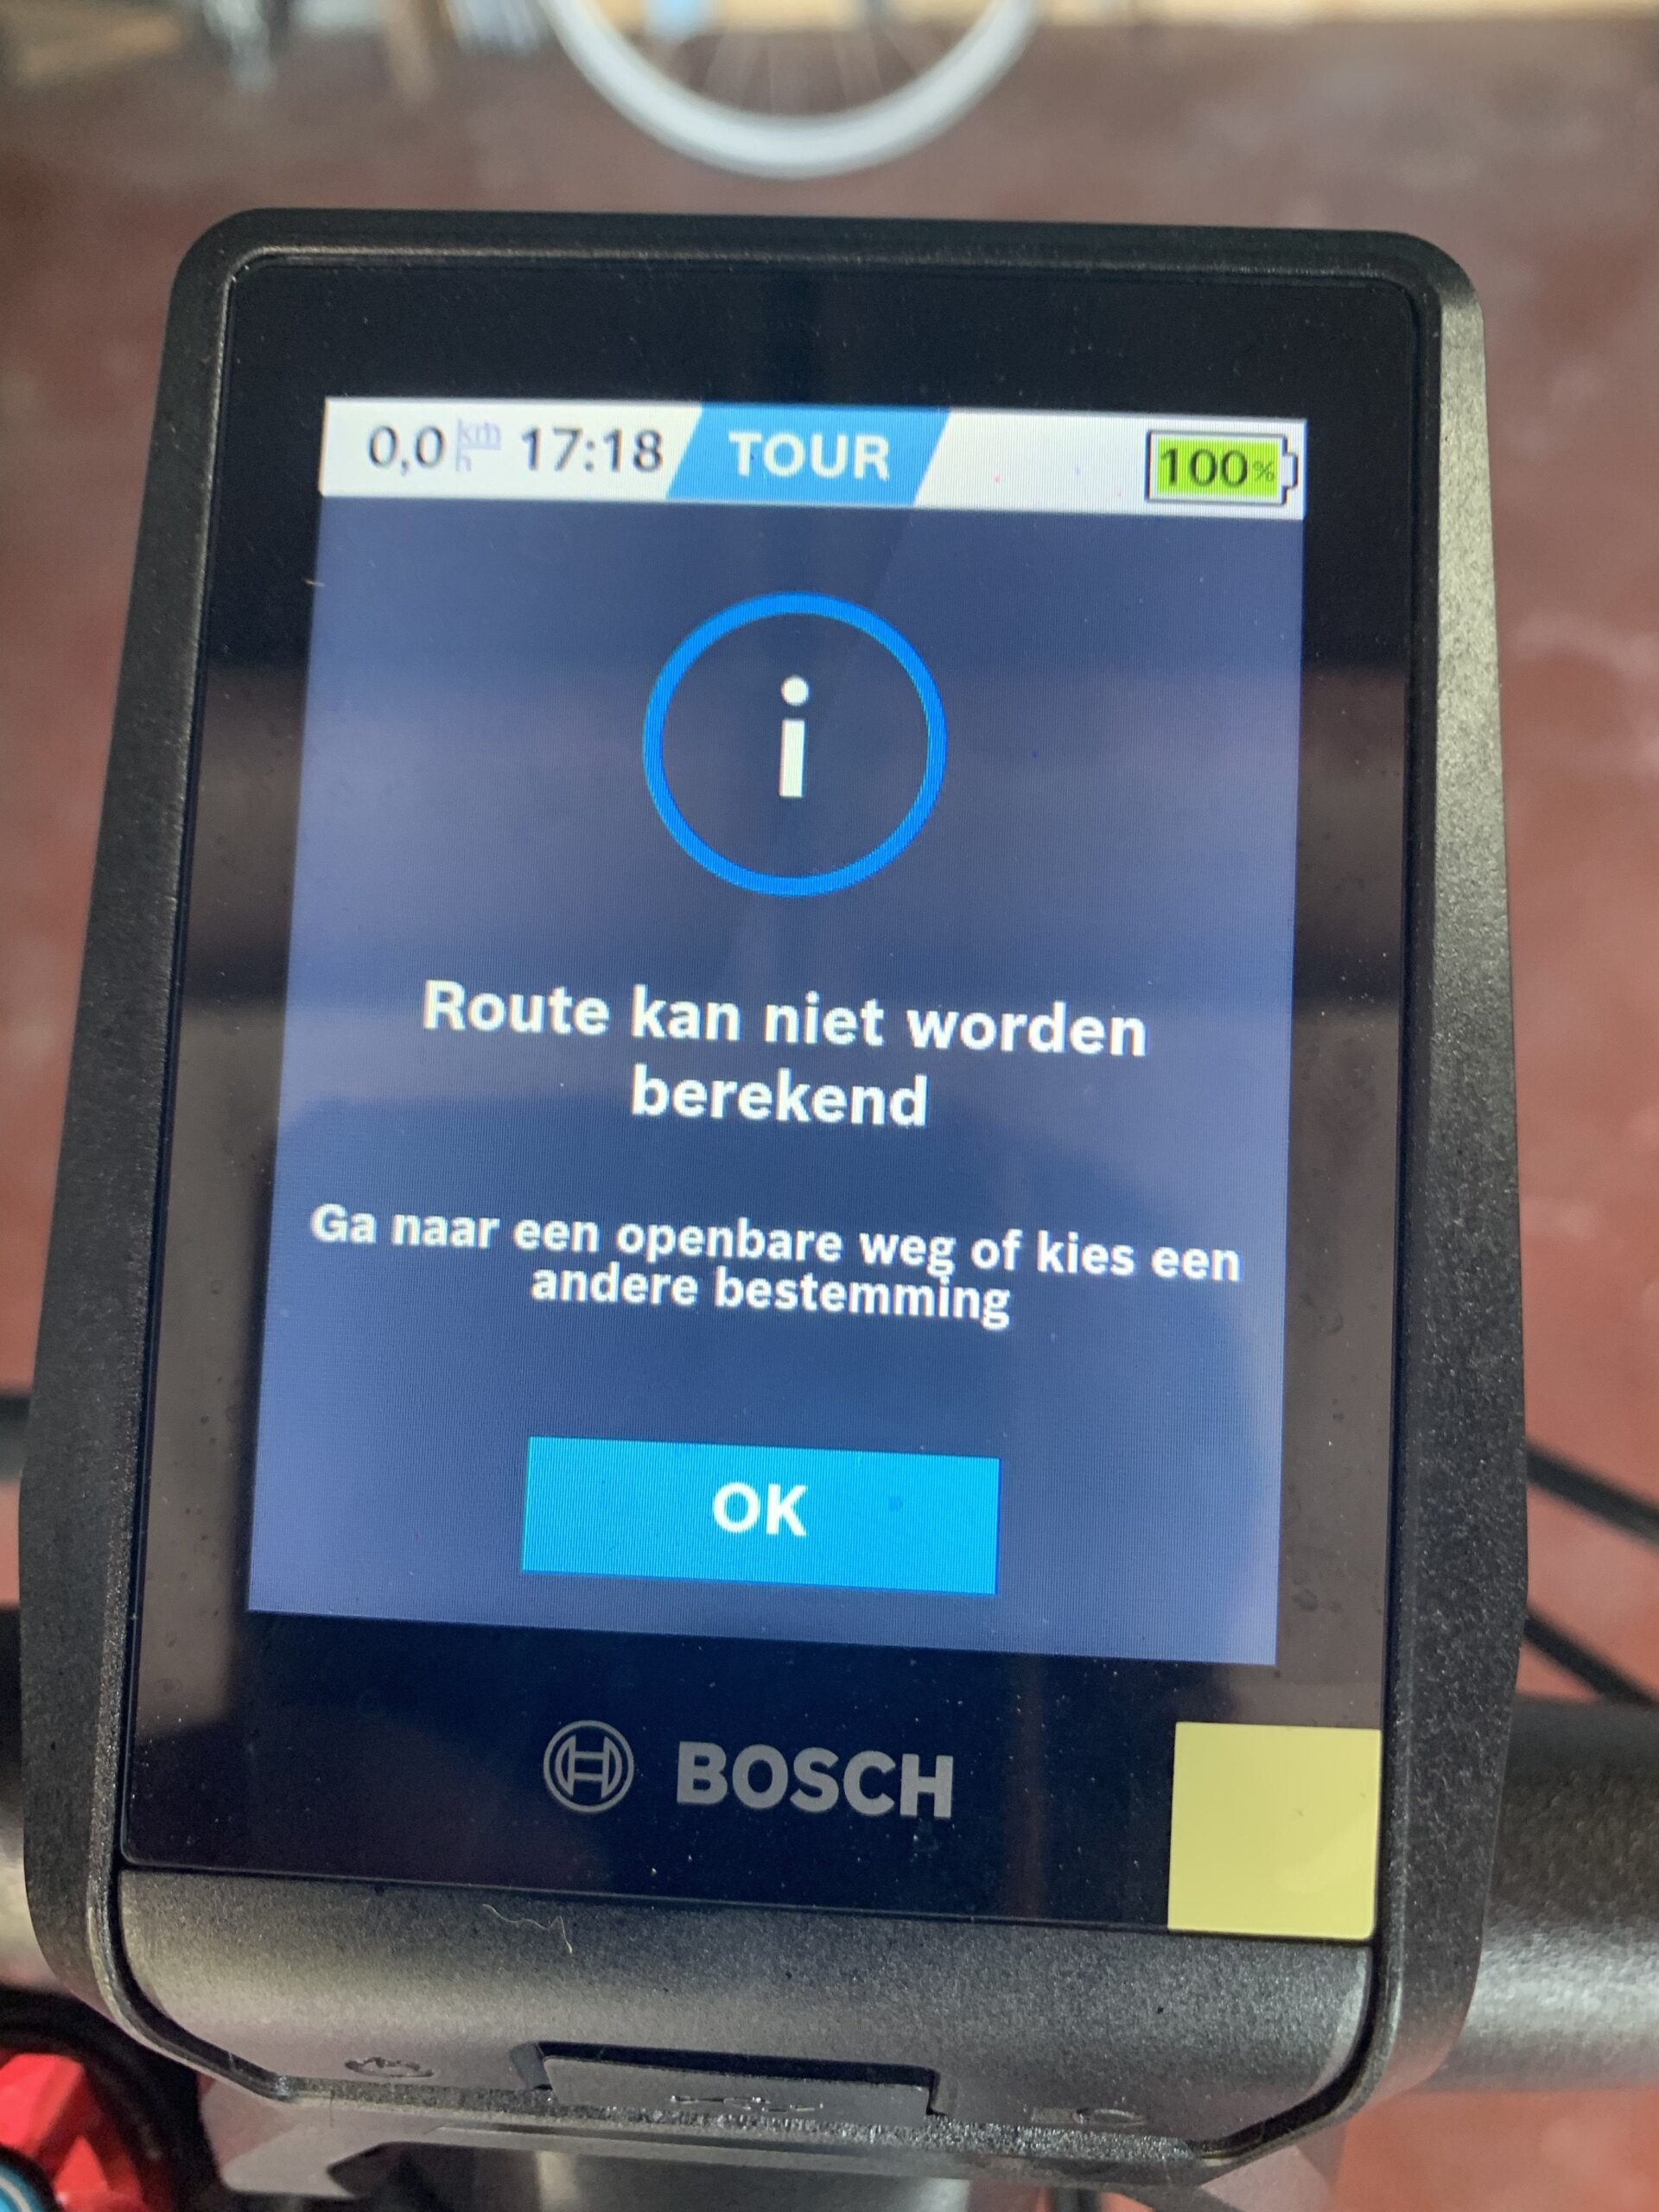 Problem with Bosch Nyon 2021 GPS